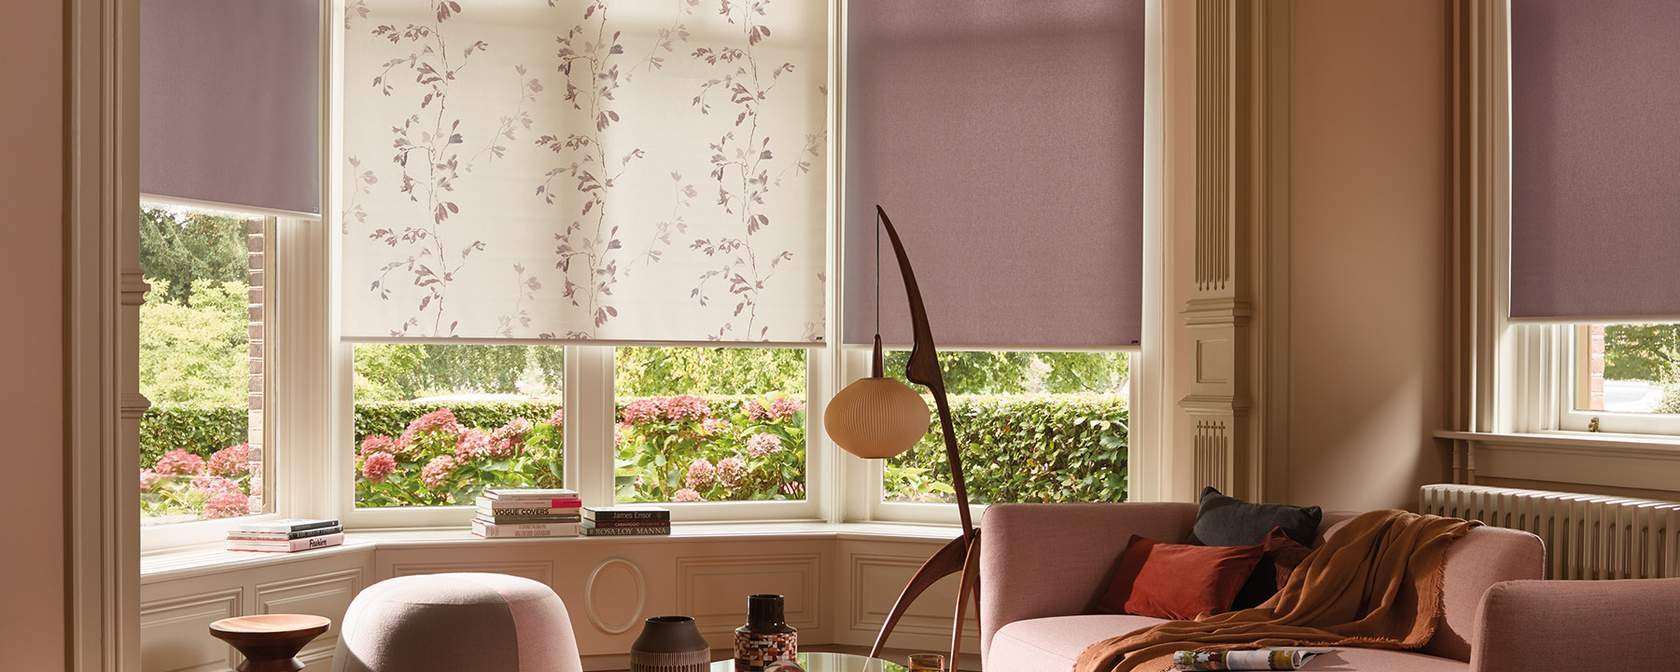 Get Roman Blinds Near You to Make Your Space Elegant